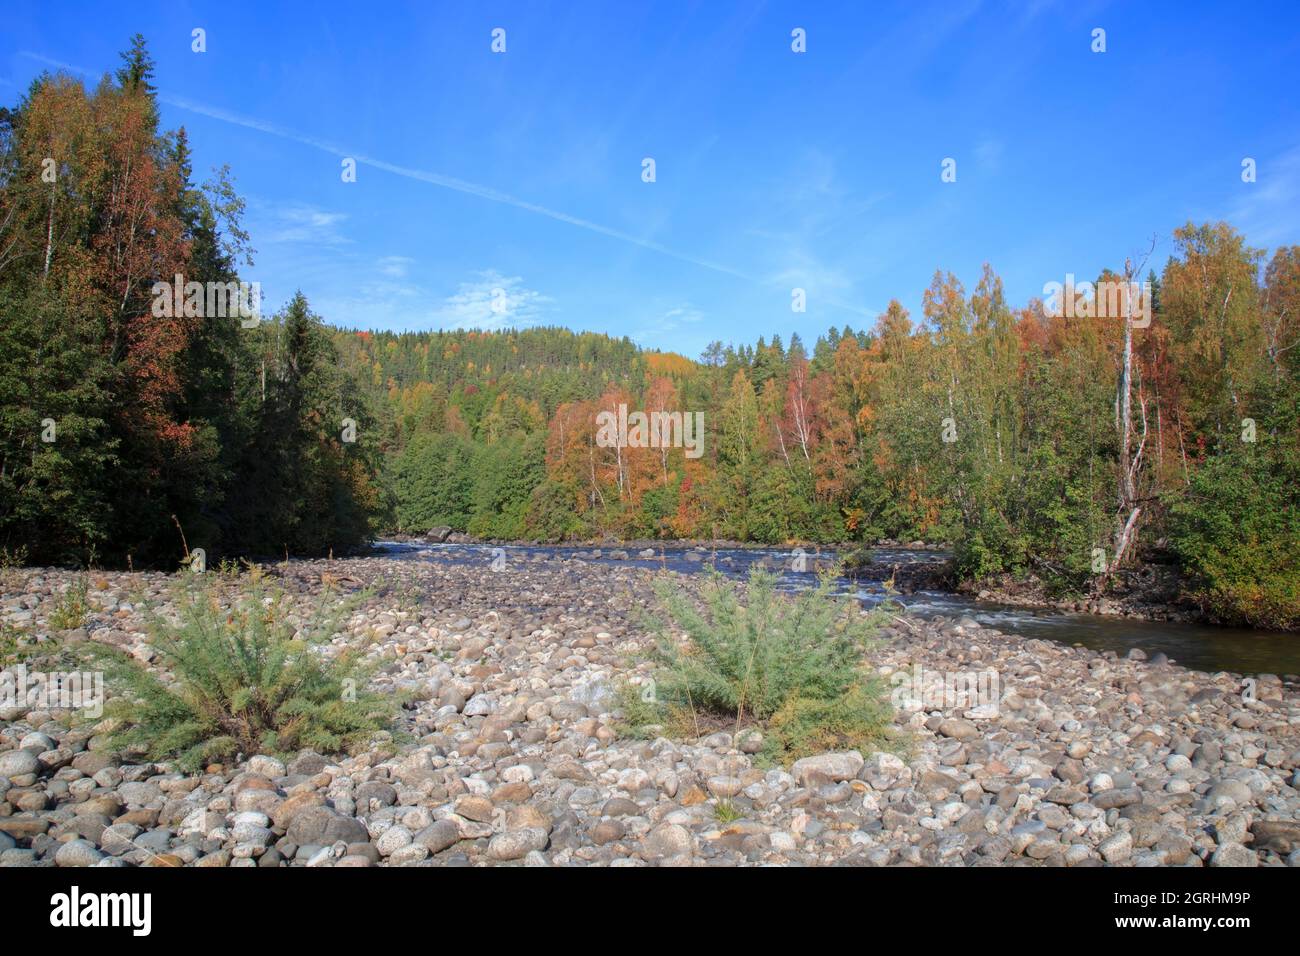 bushes in a rock, river forest mountain landscape Stock Photo